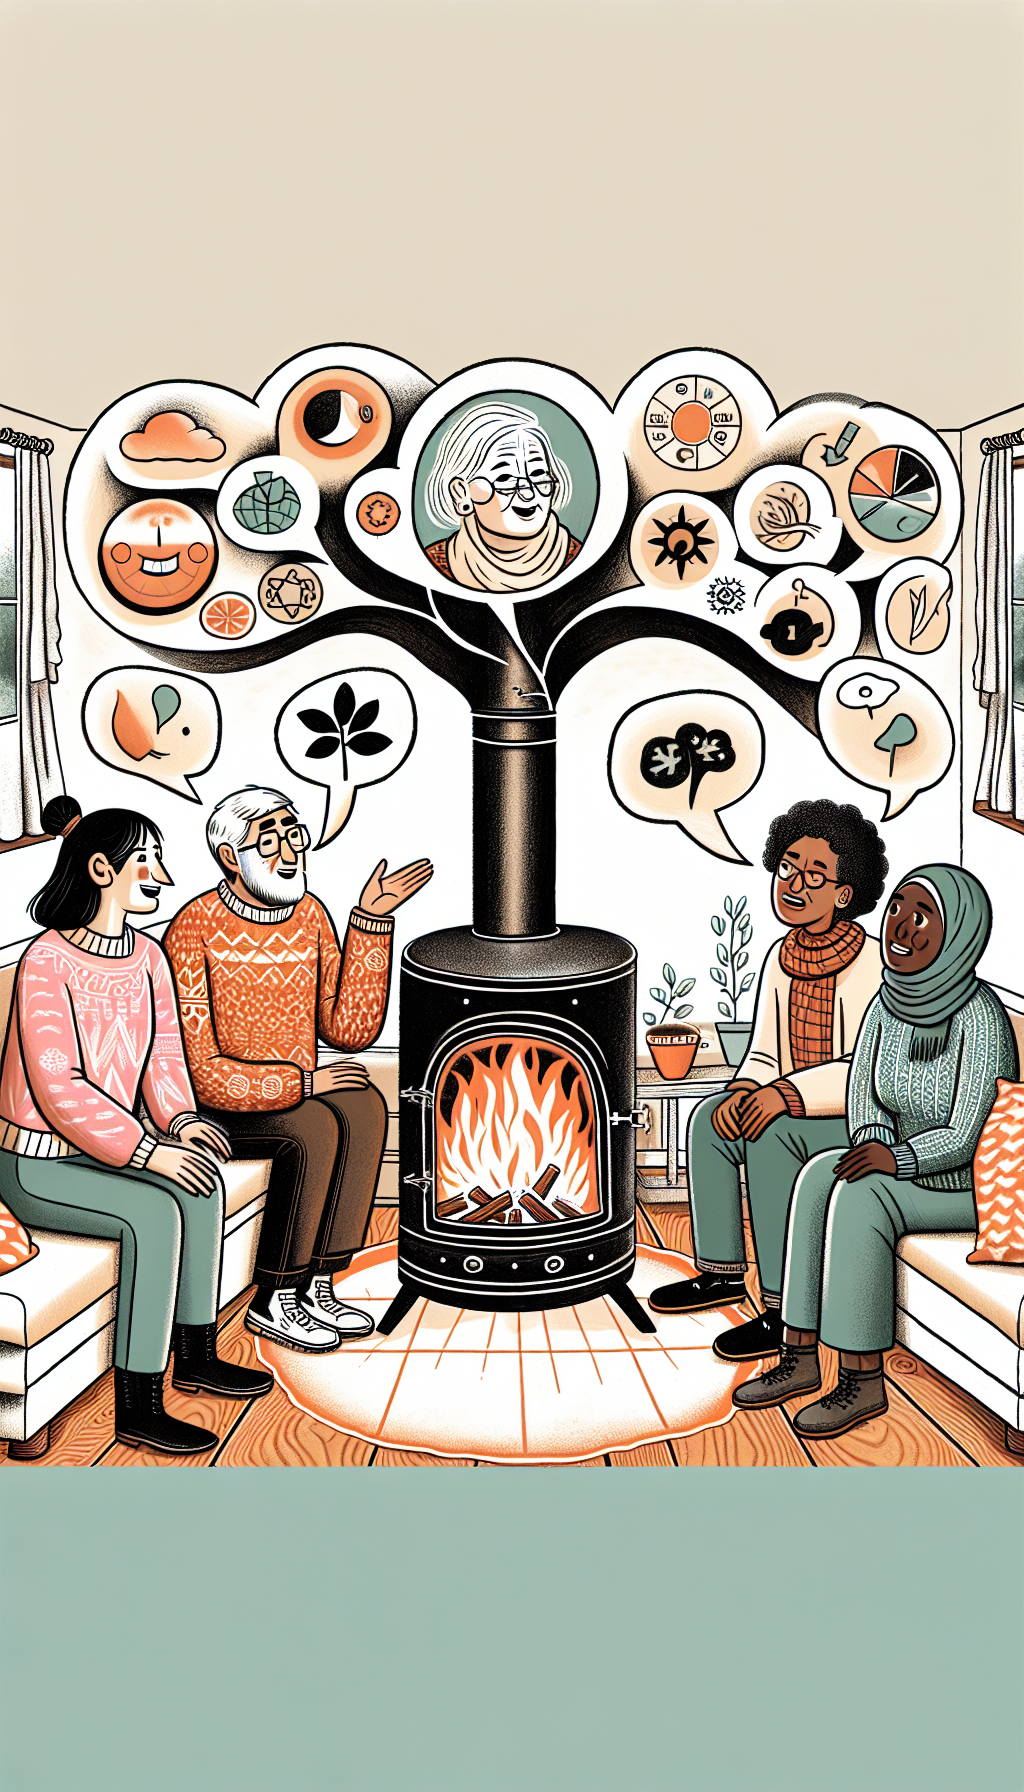 An illustration depicts a cozy living room scene with diverse homeowners gathered around a vibrant, crackling 'Earth Stove.' Each person is animatedly sharing their experience, with speech bubbles containing icons symbolizing warmth, savings, and eco-friendliness. The stove glows heartily at the center, with roots extending to the Earth, visually intertwining the stories with the core values of sustainability and community.